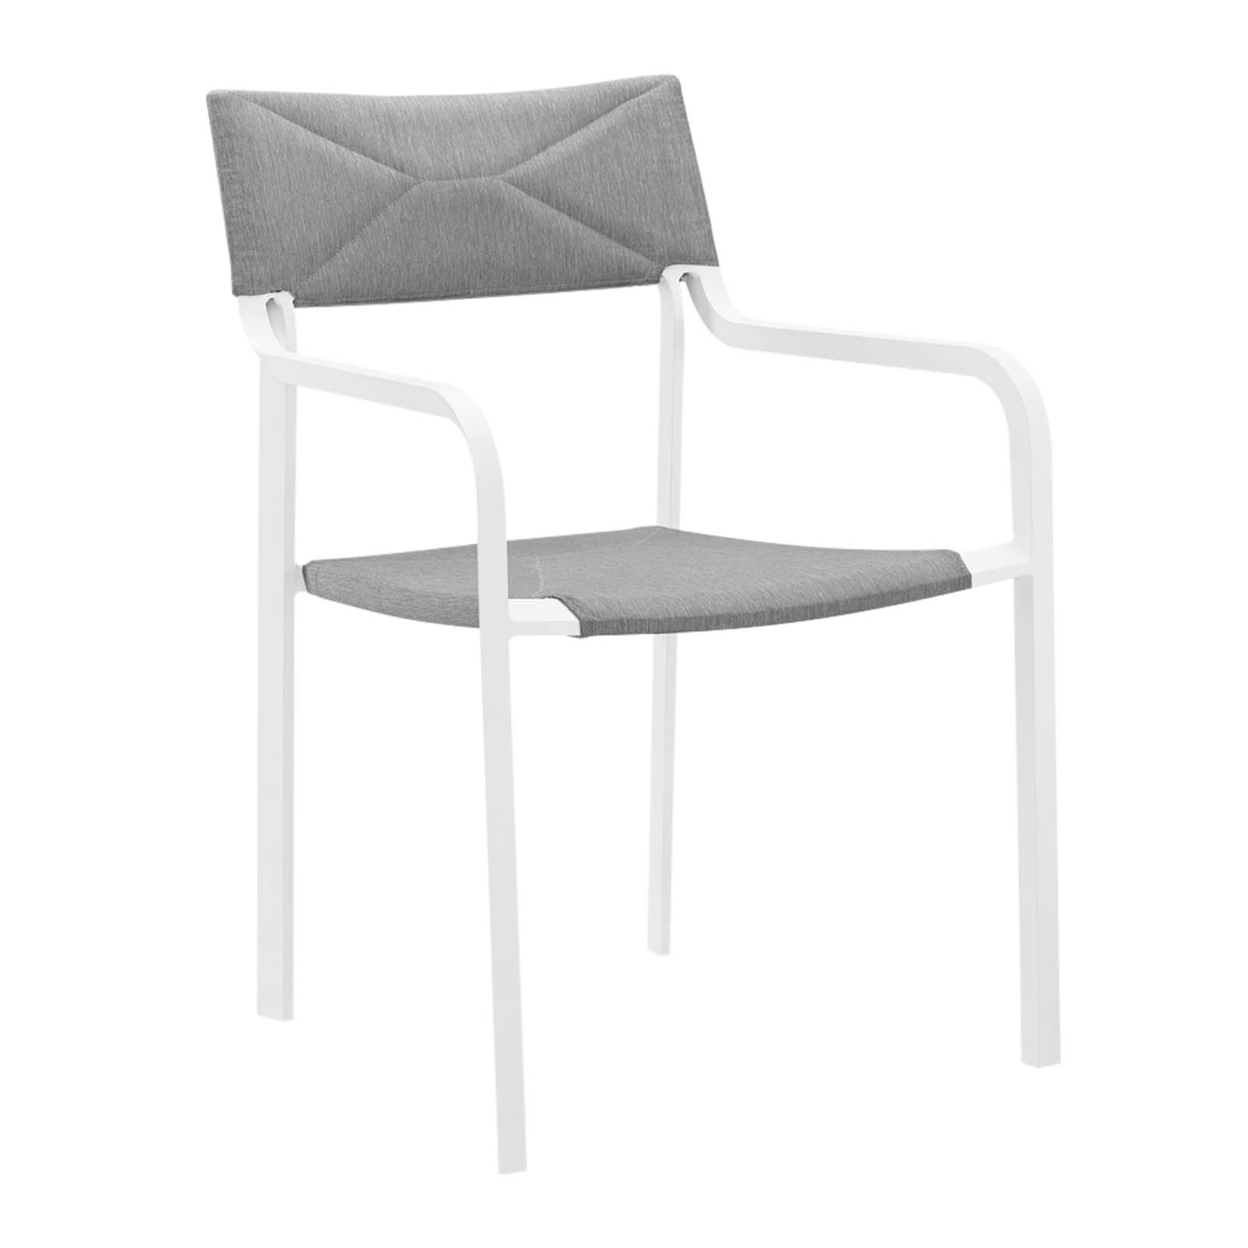 Raleigh Stackable Outdoor Patio Aluminum Dining Armchair, White Gray